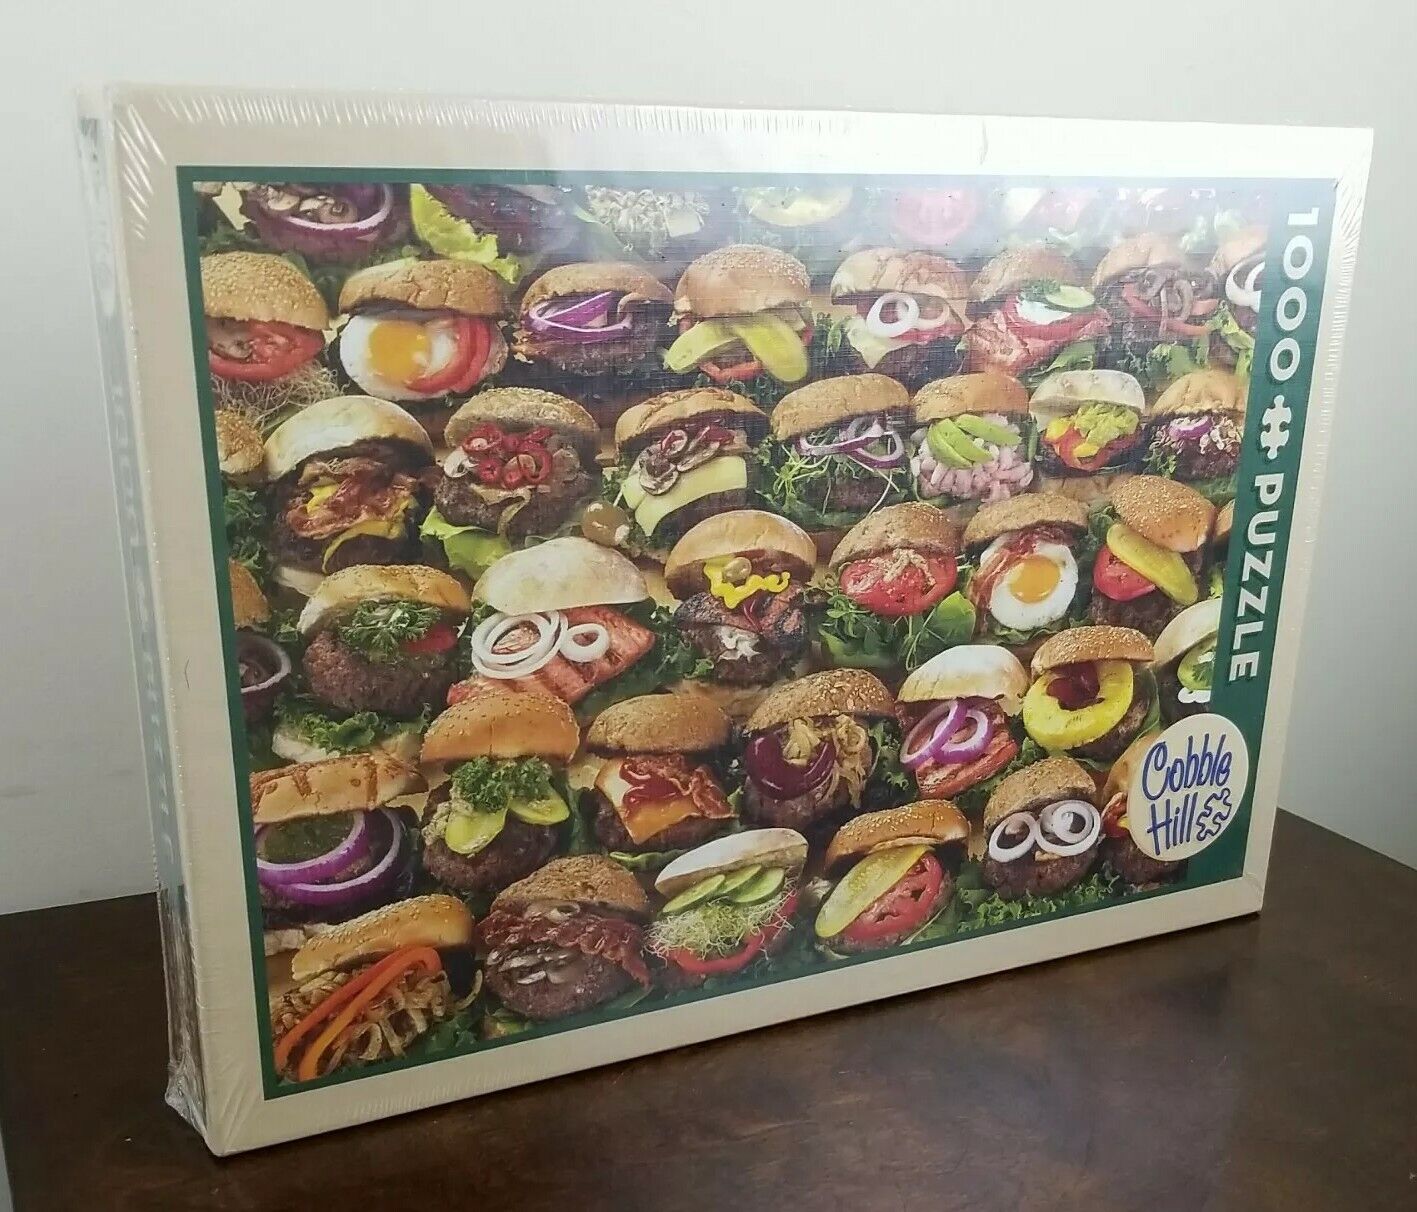 New Sealed Cobble Hill Burgers Burger Food 1000 Piece Jigsaw Puzzle